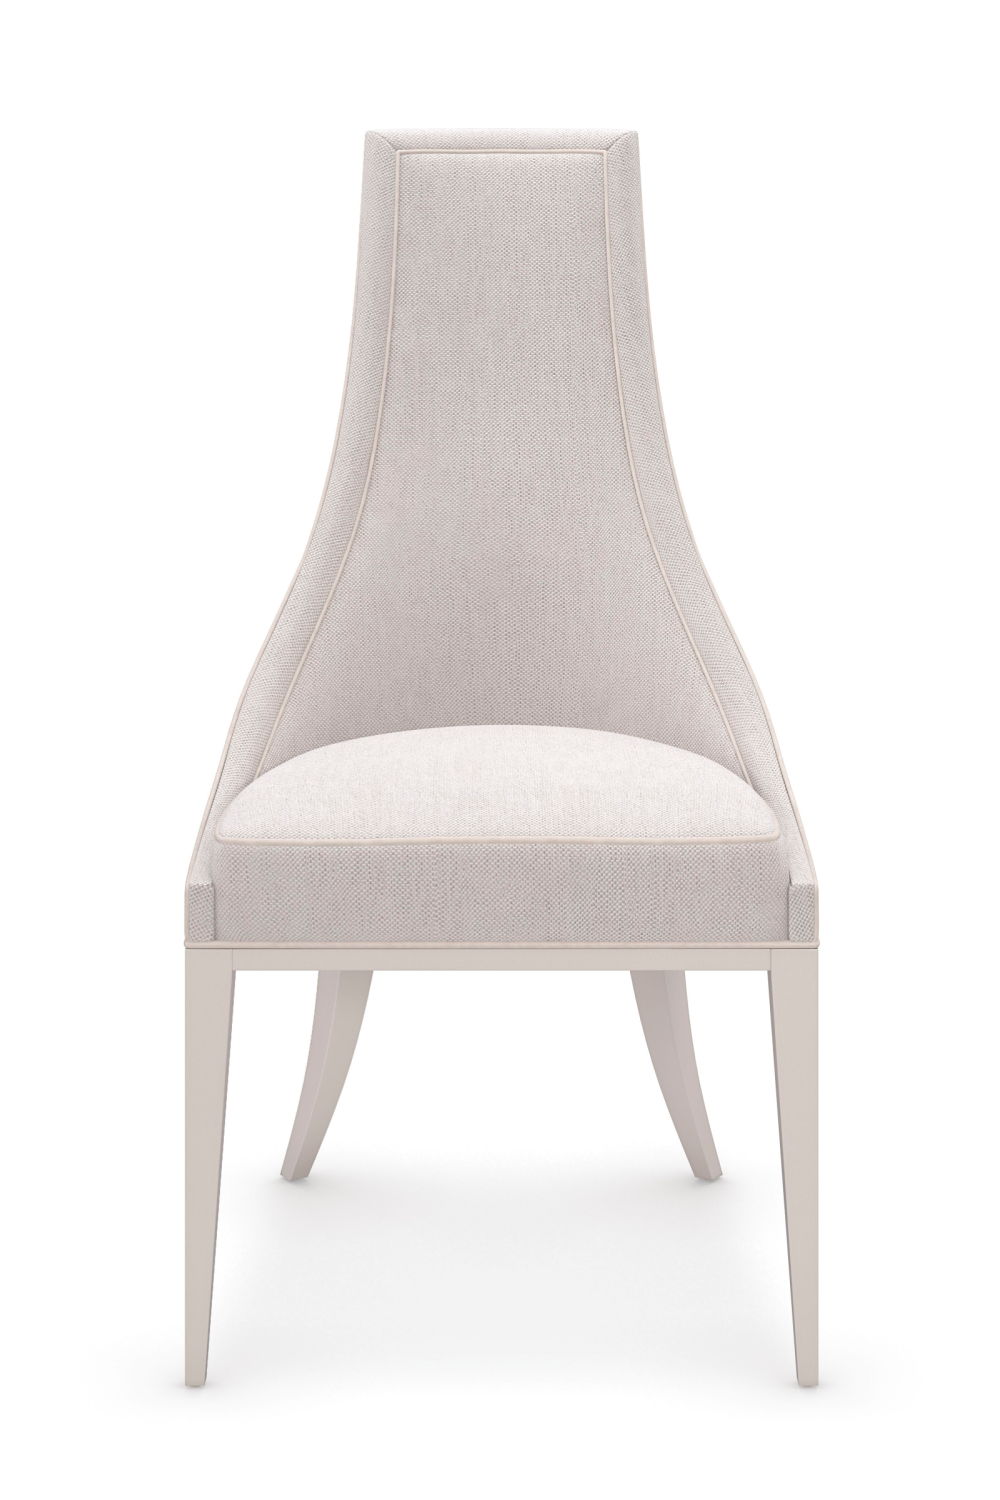 Off White Tapering Side Chair | Caracole Tall Order | Oroa.com